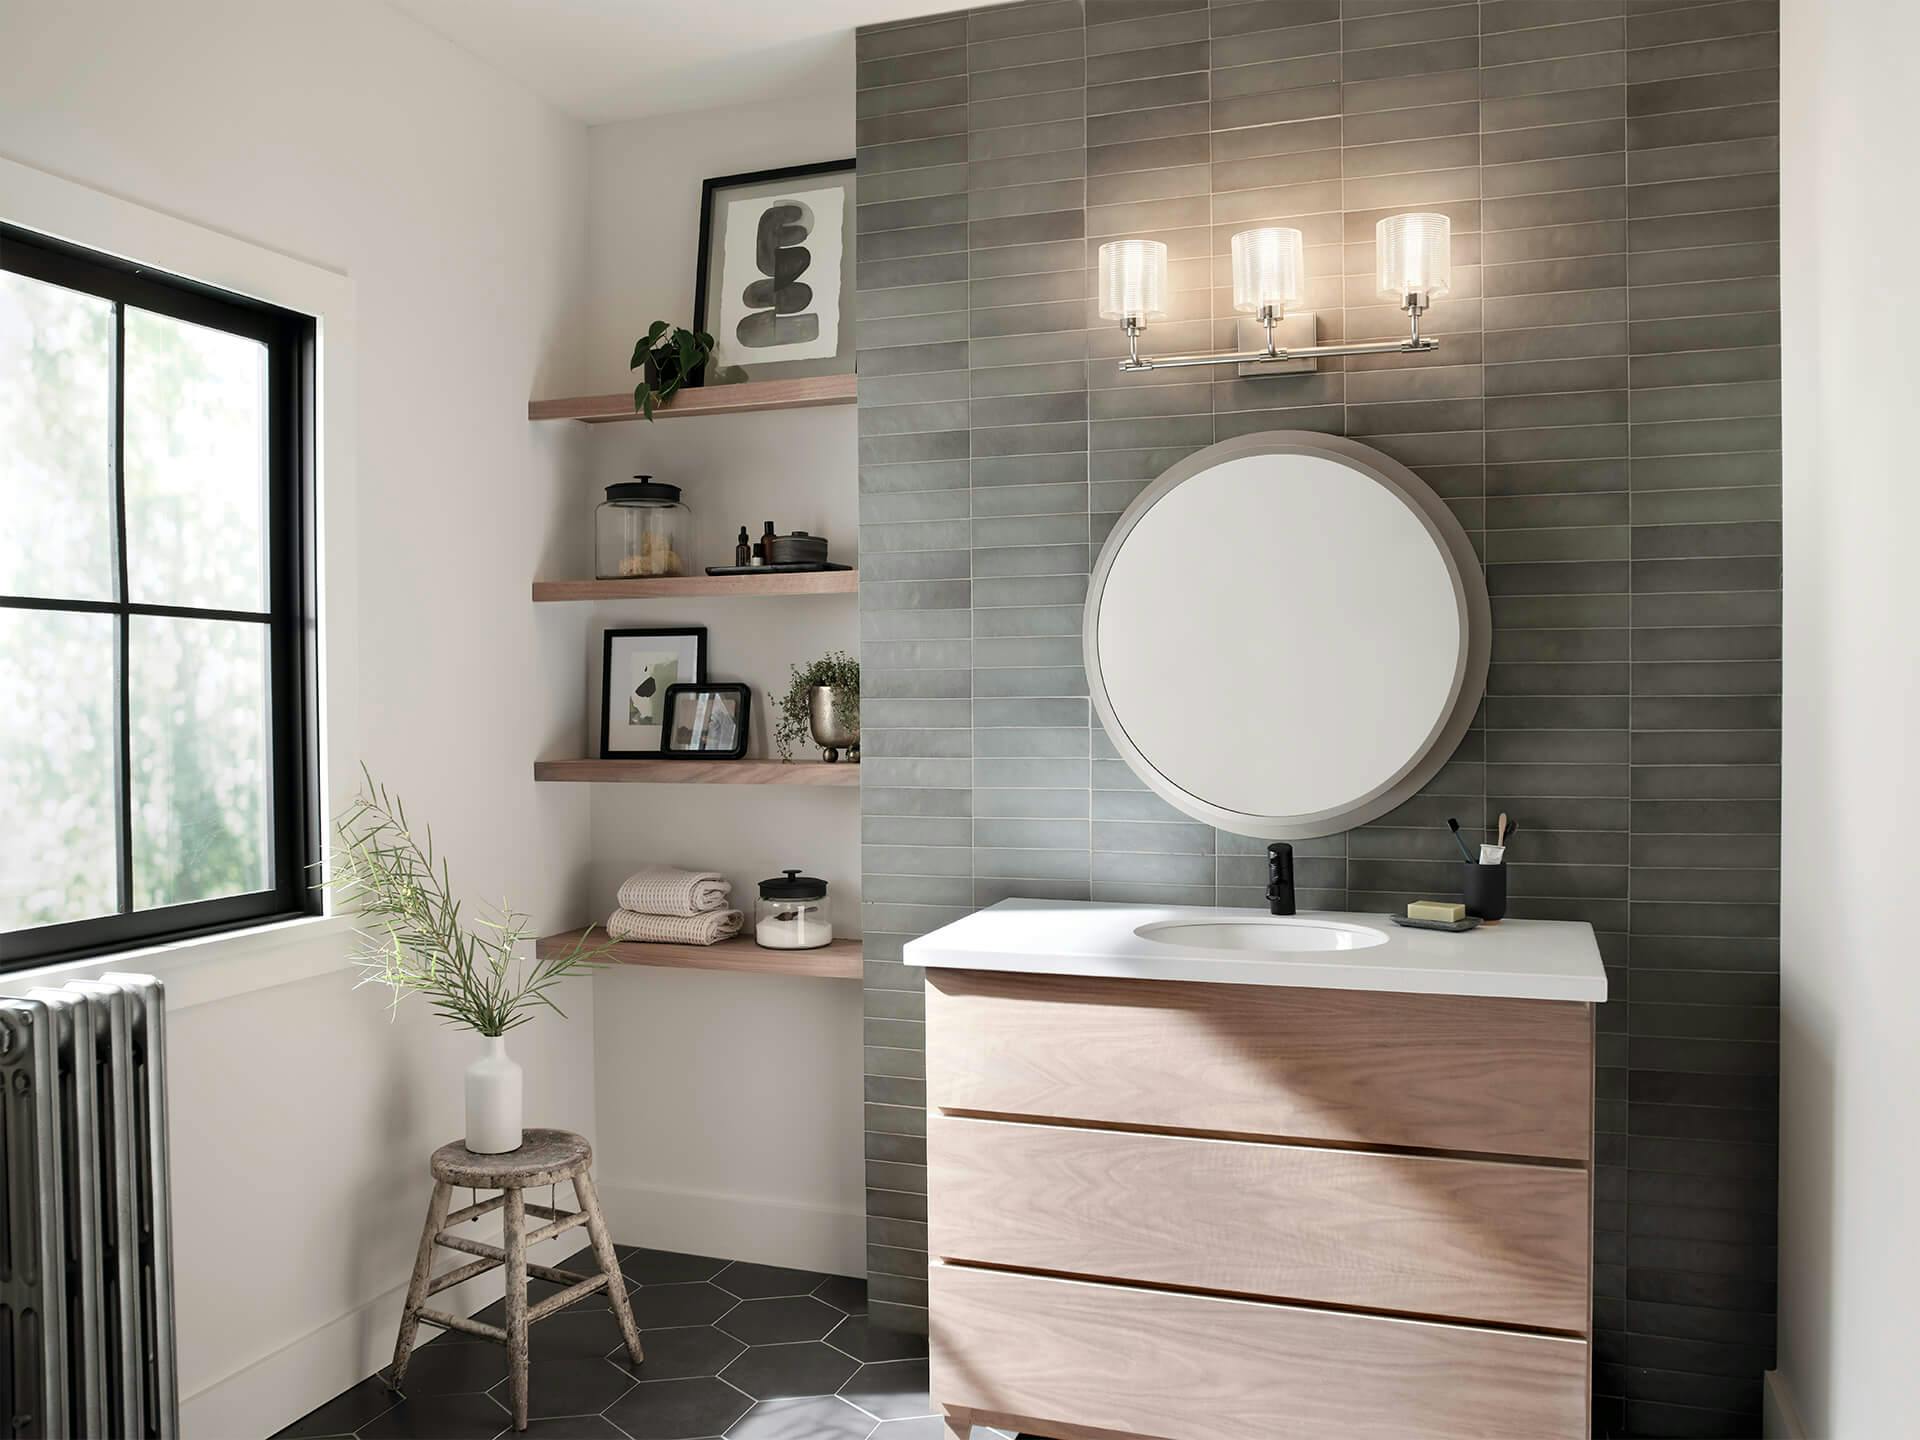 A modern bathroom with a Harvan vanity light installed on a grey brick textured wall above a mirror in the daytime with the lights turned on 